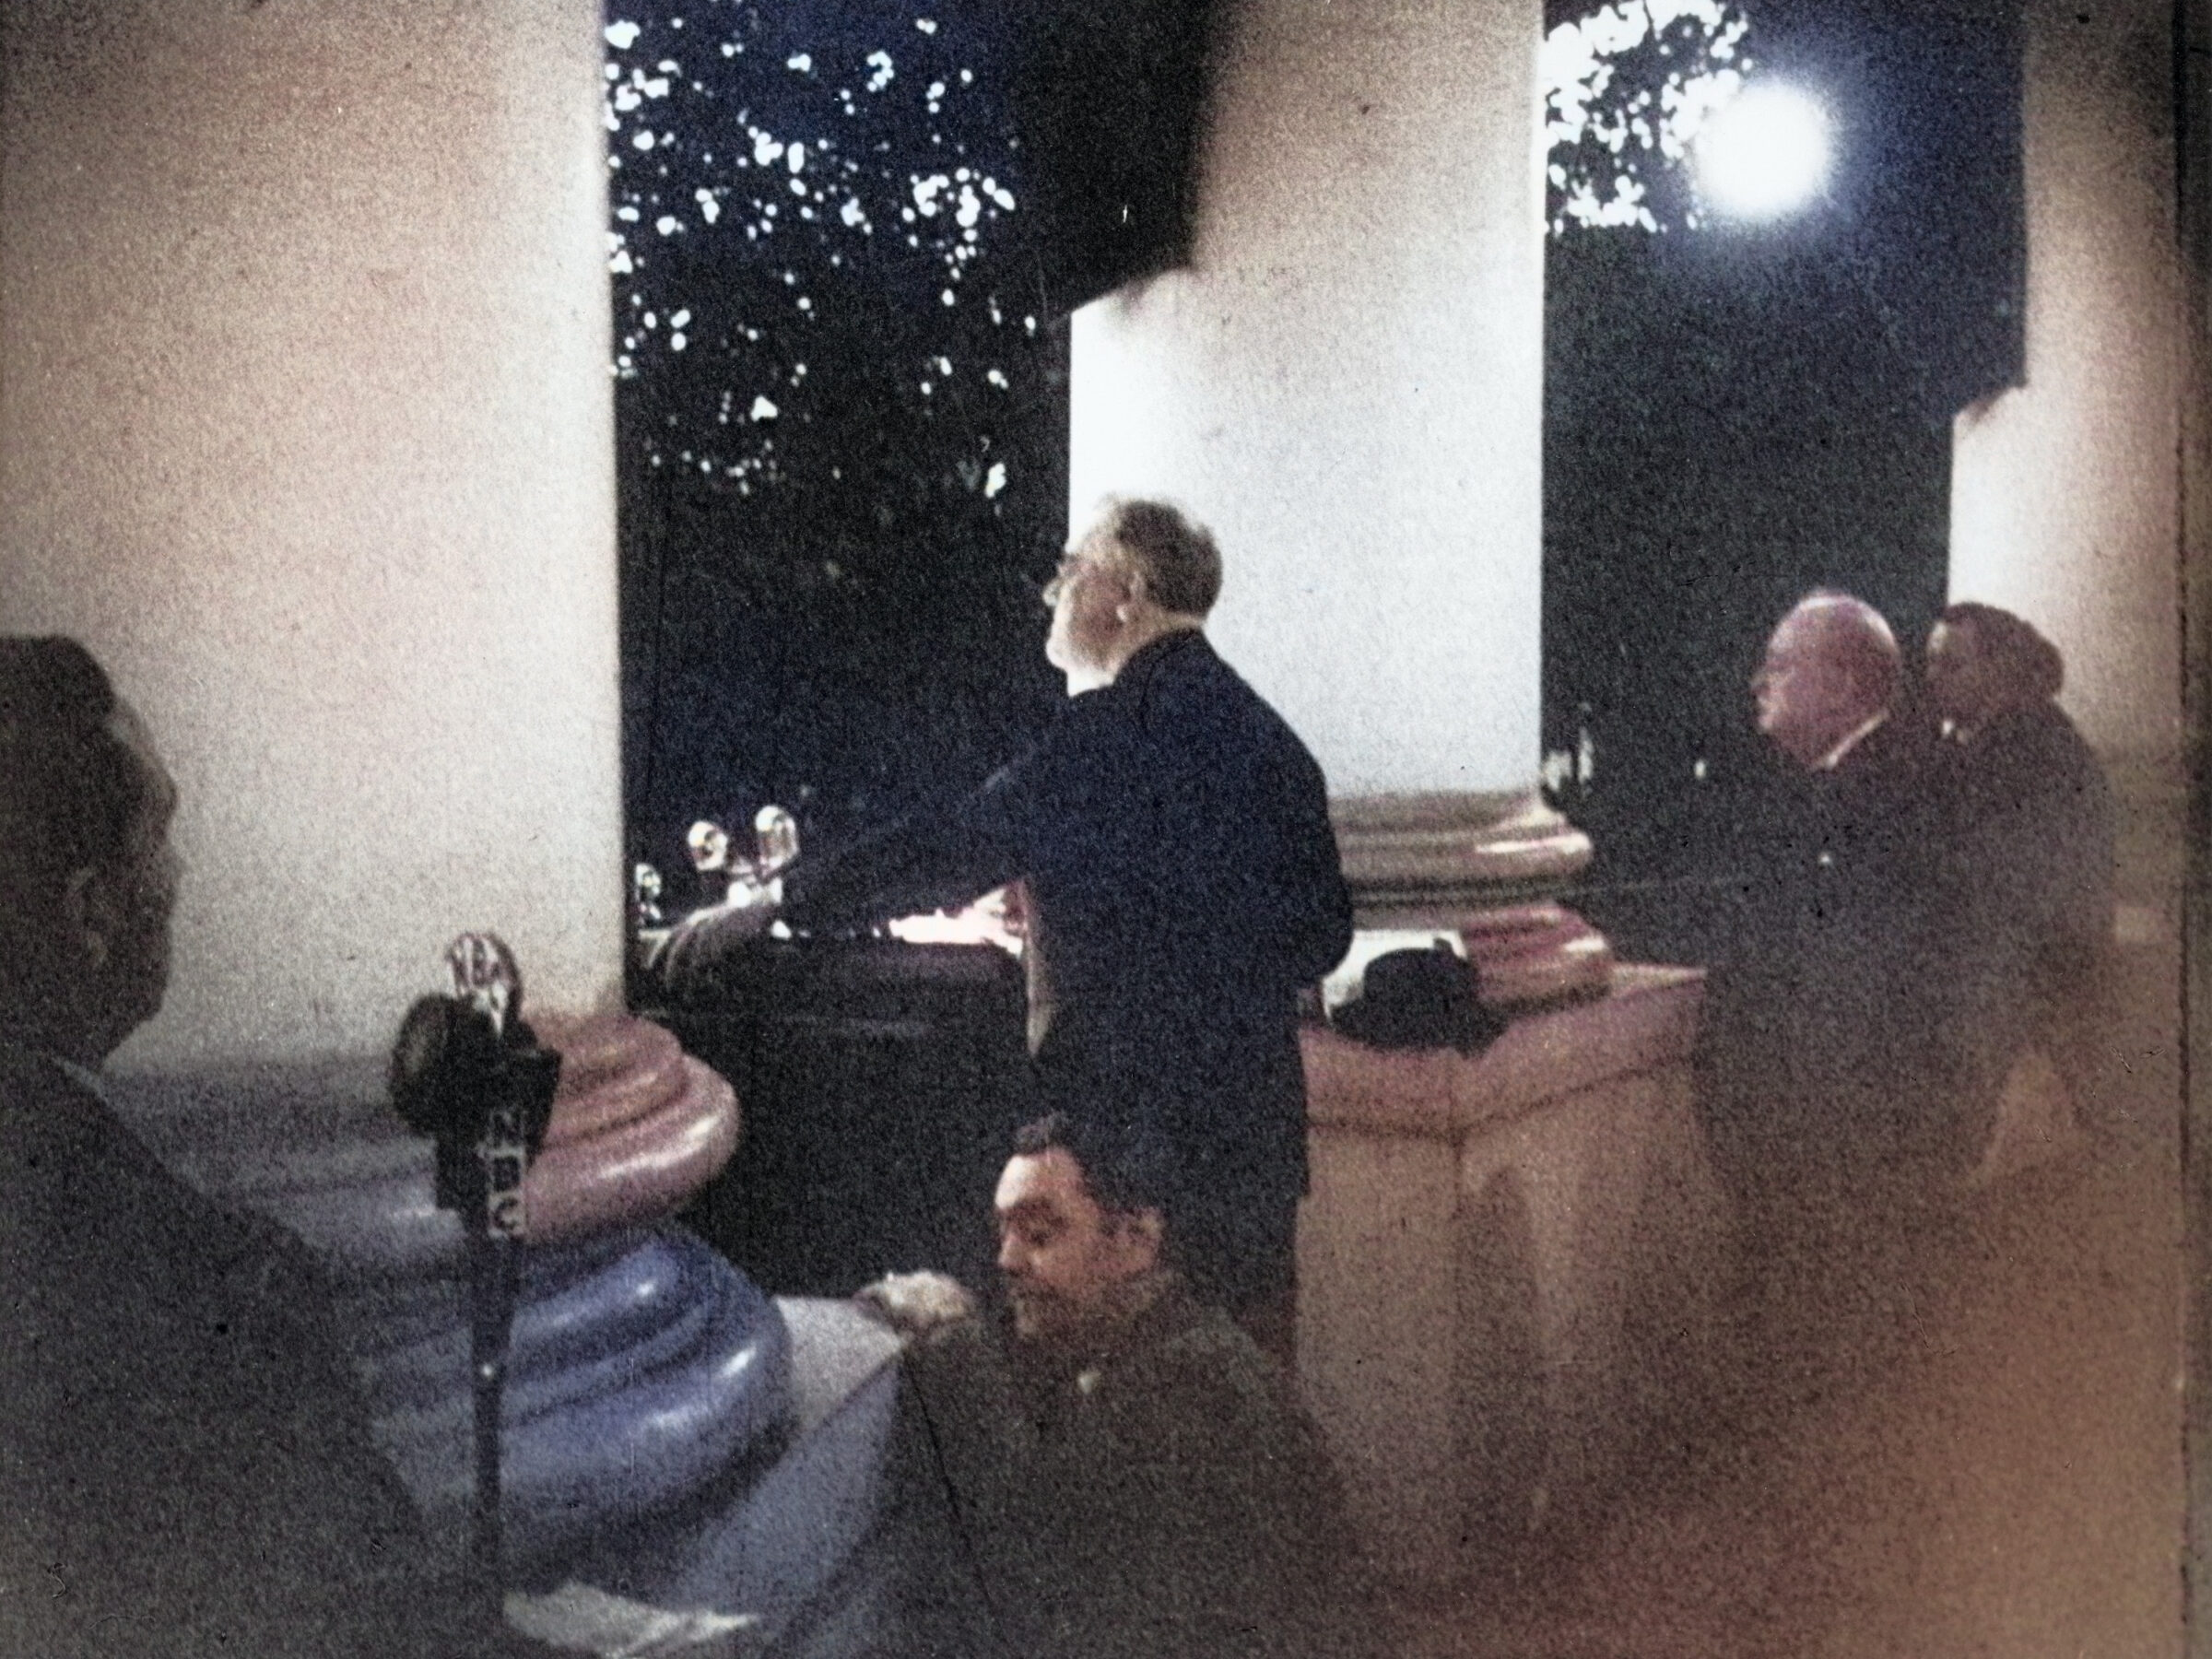 President Roosevelt and British Prime Minister Winston Churchill on Christmas Eve, 1941, standing at a White House podium weeks after the attack on Pearl Harbor, with an NBC microphone and a man in the foreground.